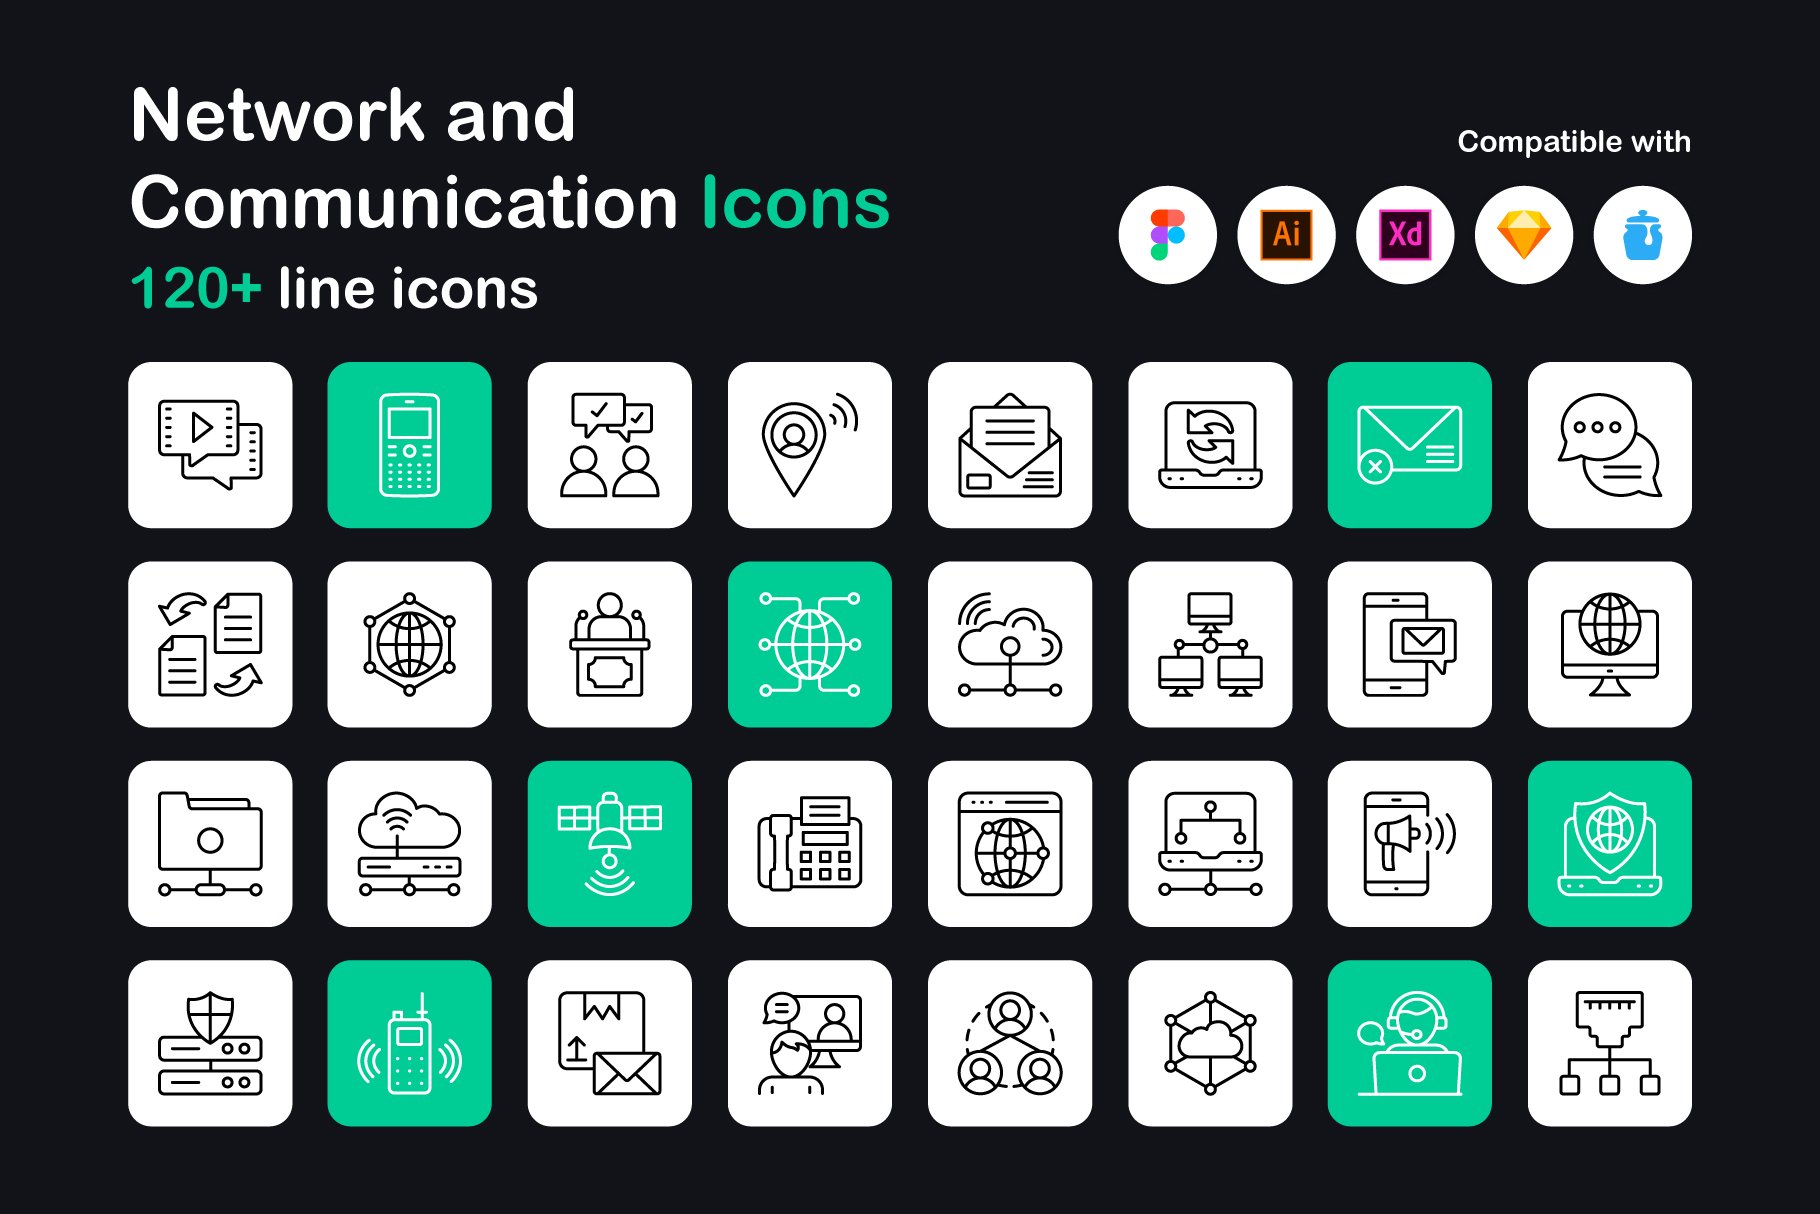 Network and Communication Icons cover image.